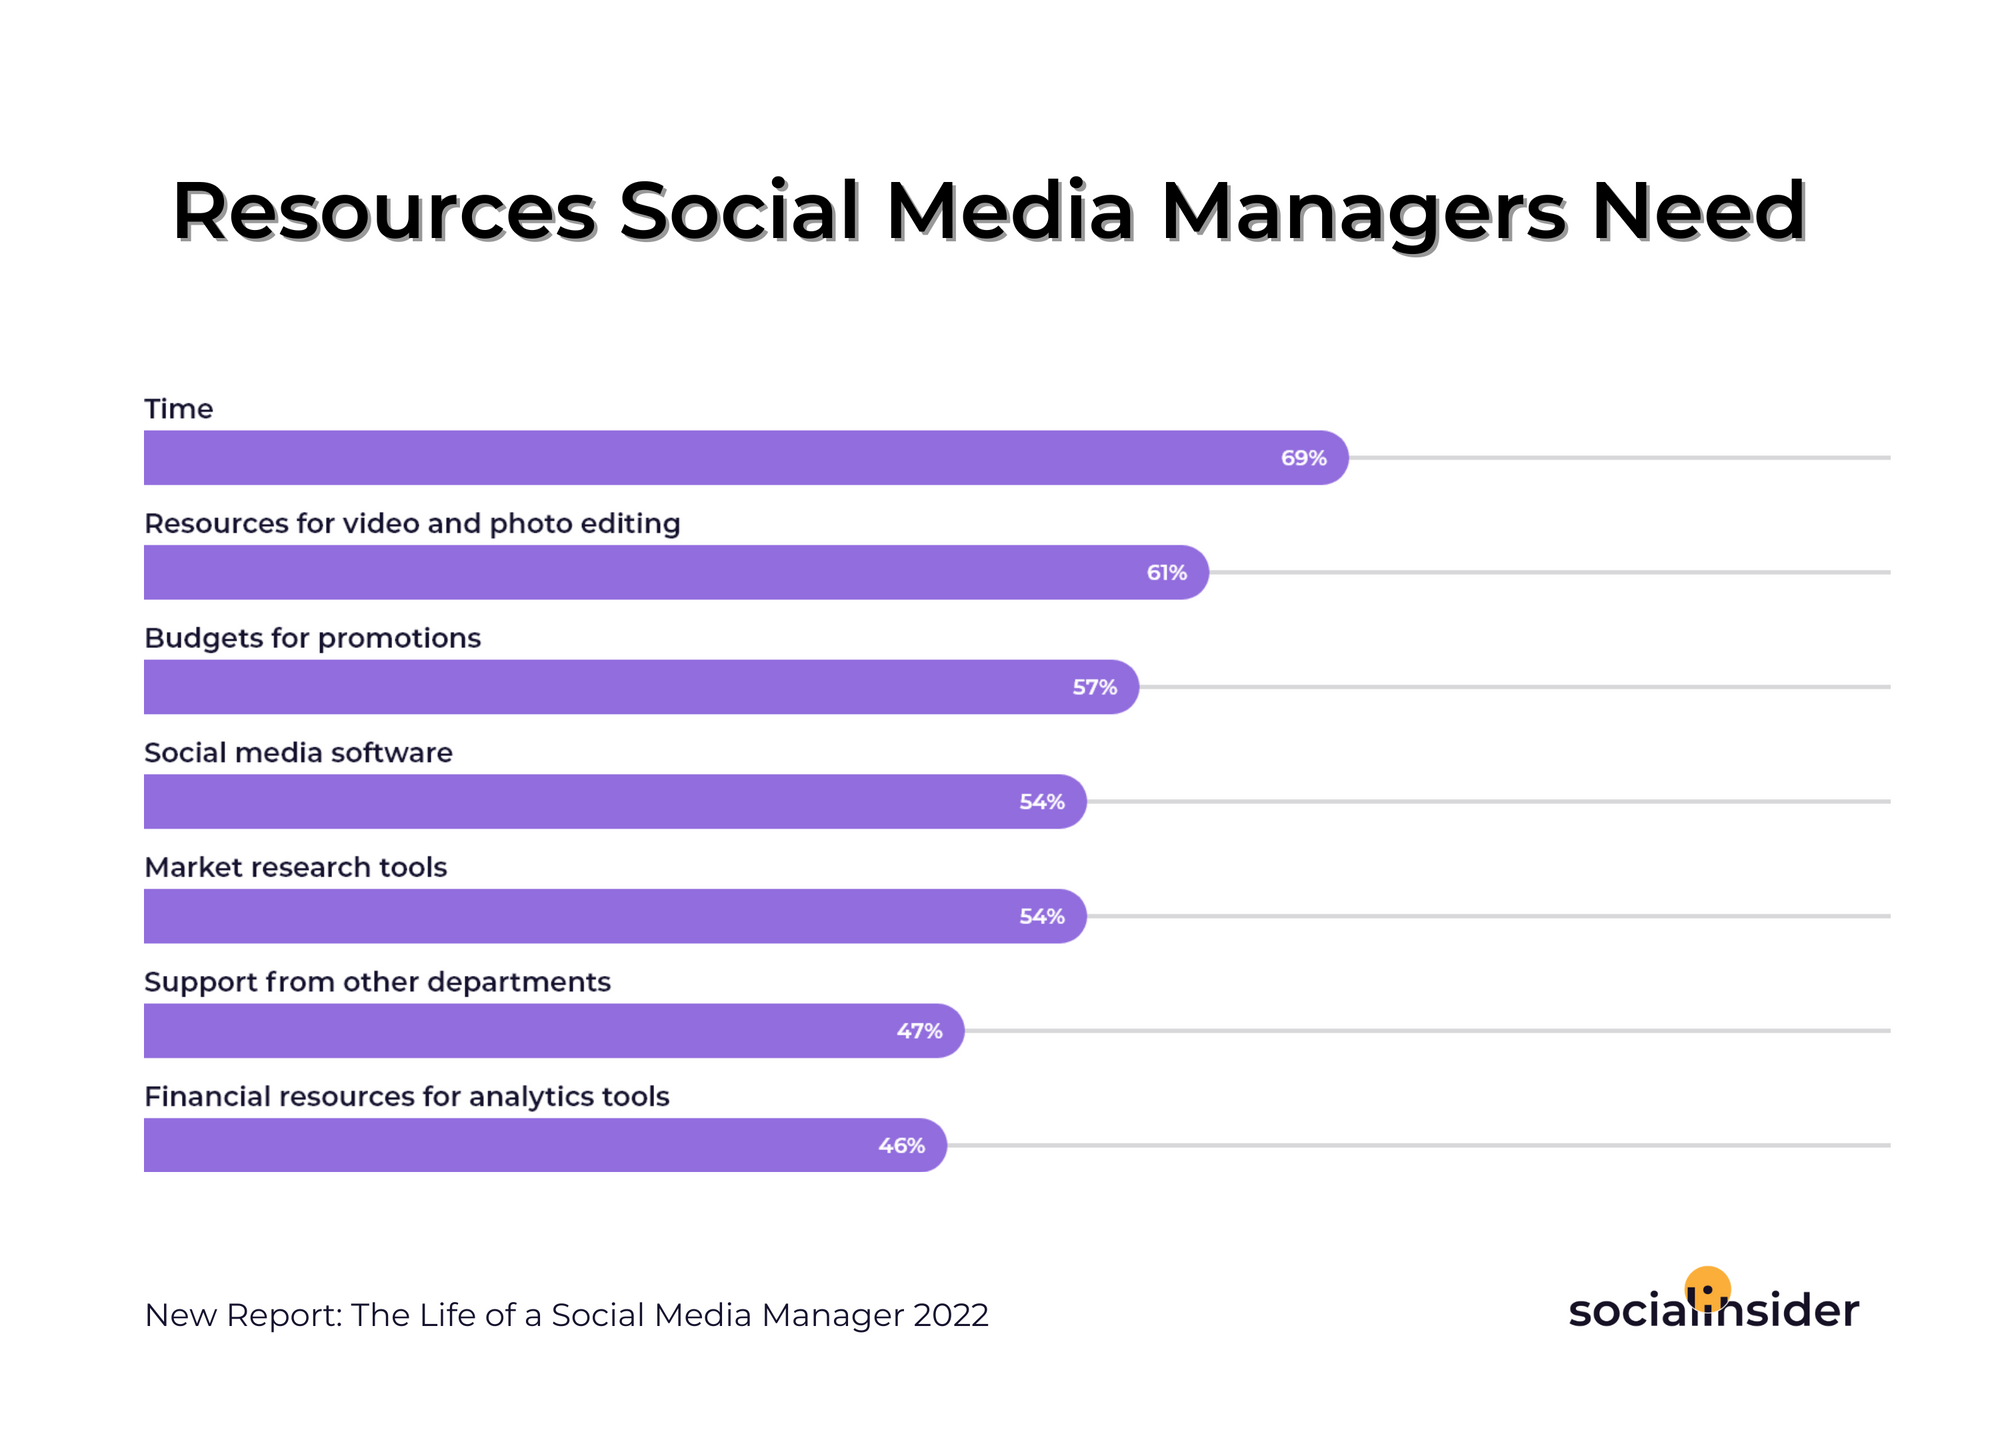 This is a graph that includes all resources that a social media manager neds